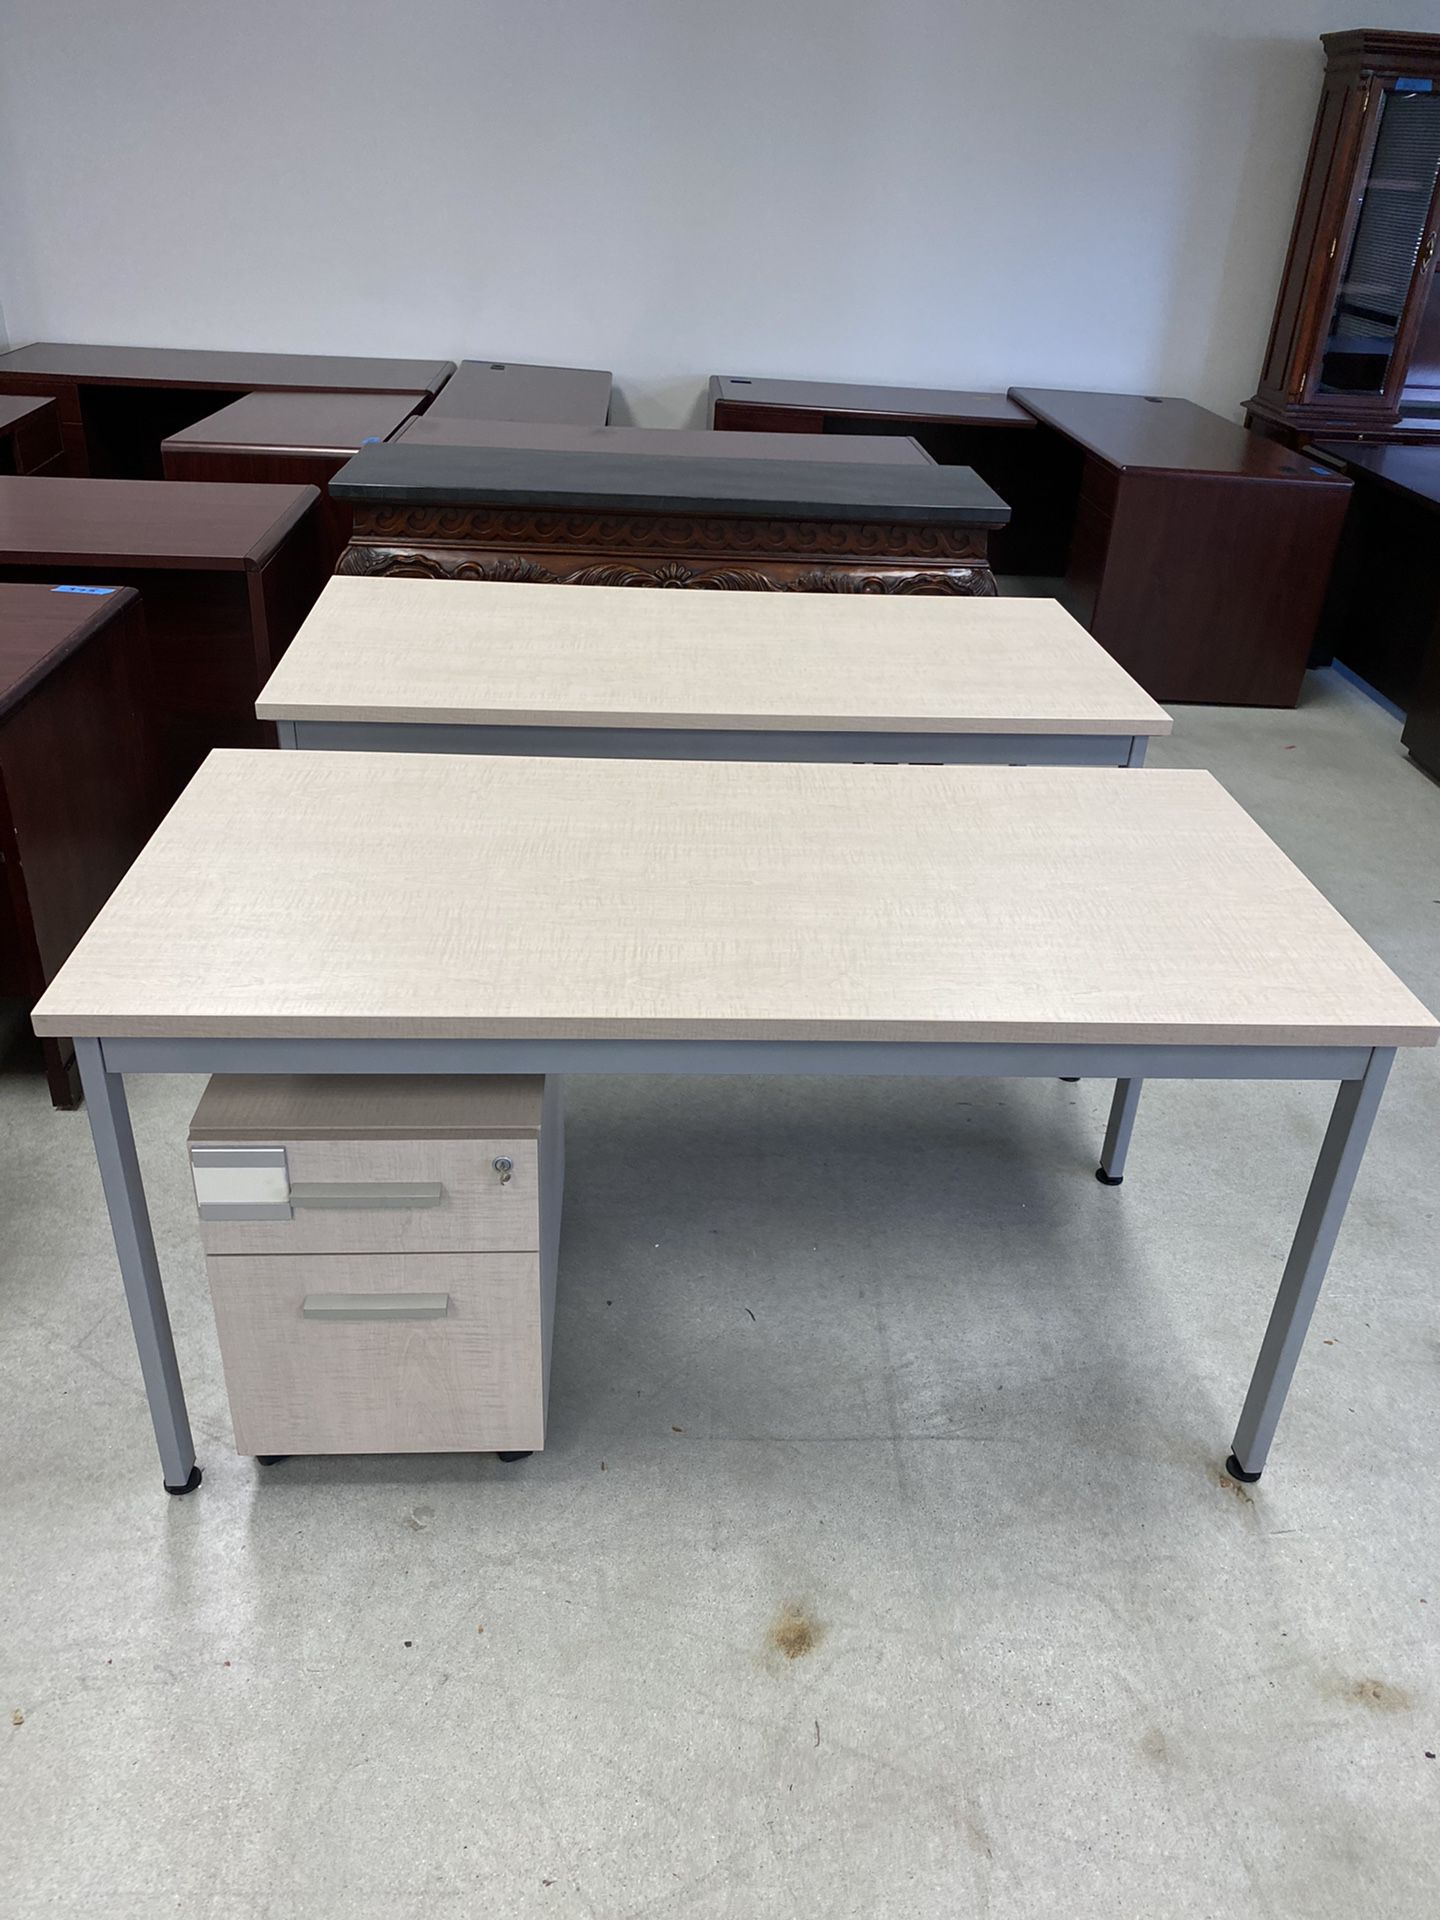 5 foot table desk with rolling file with key